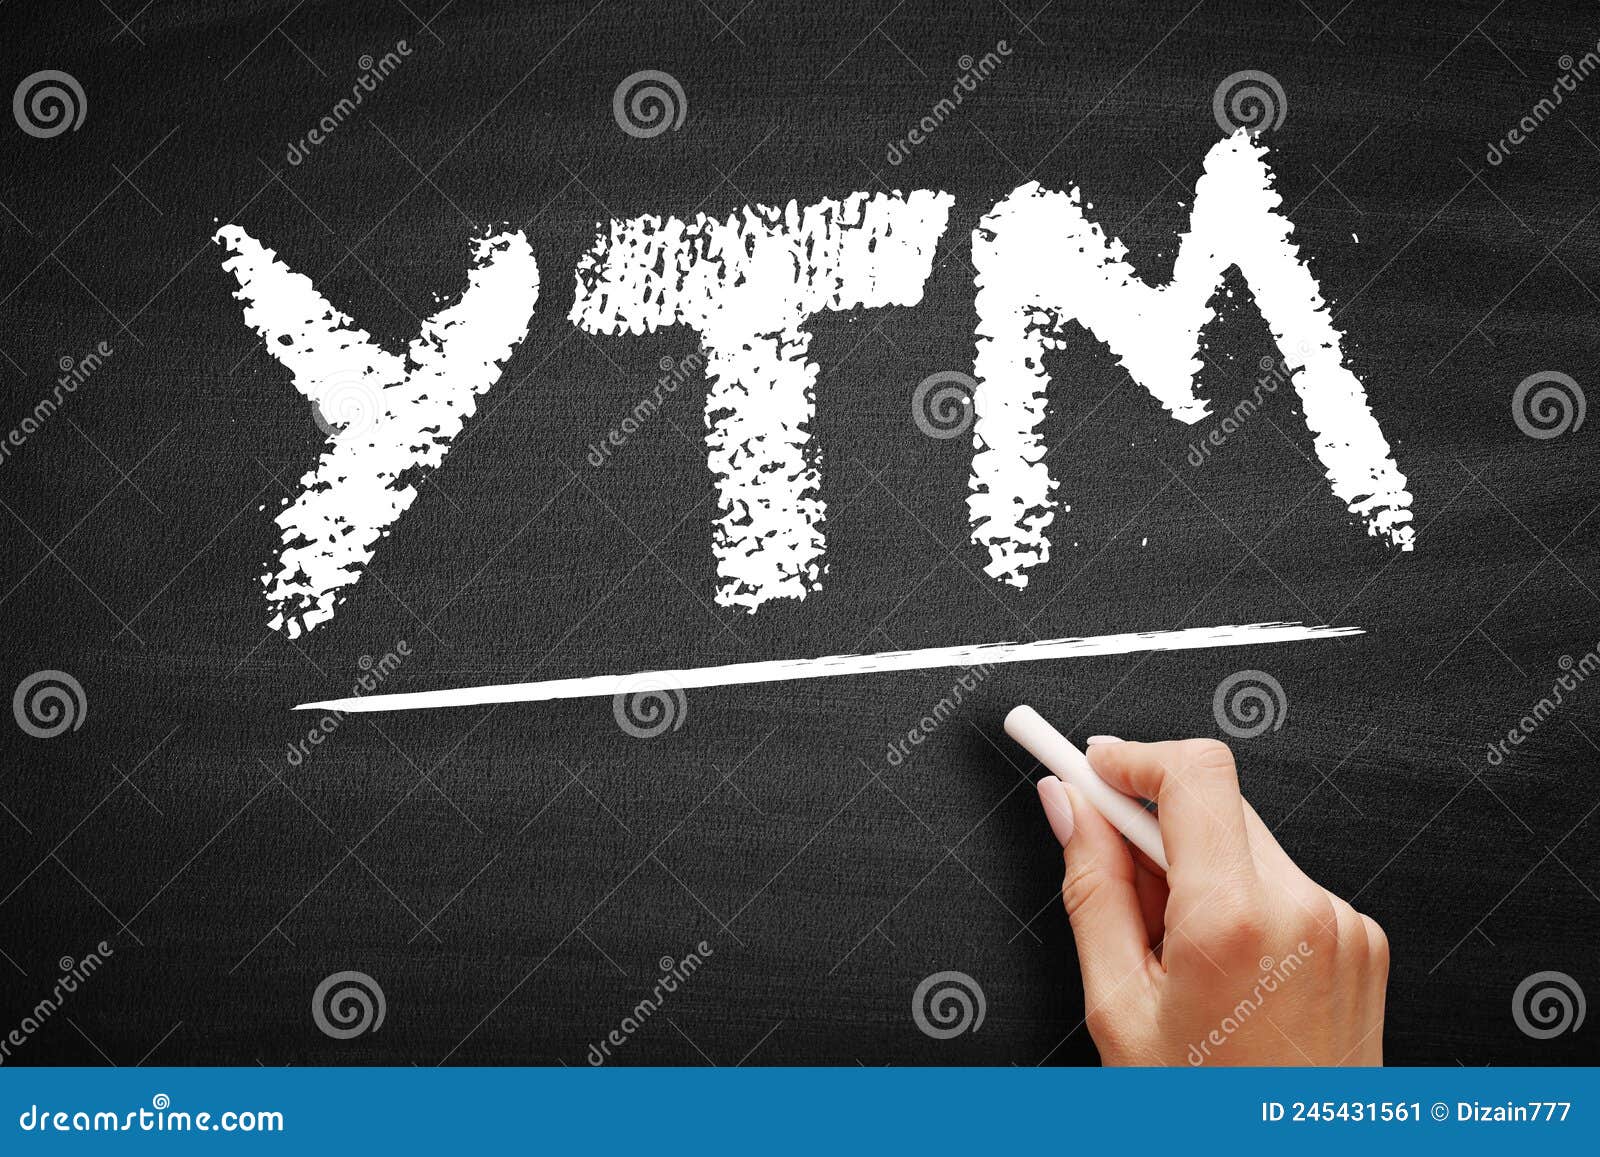 ytm - yield to maturity is the percentage rate of return for a bond assuming that the investor holds the asset until its maturity